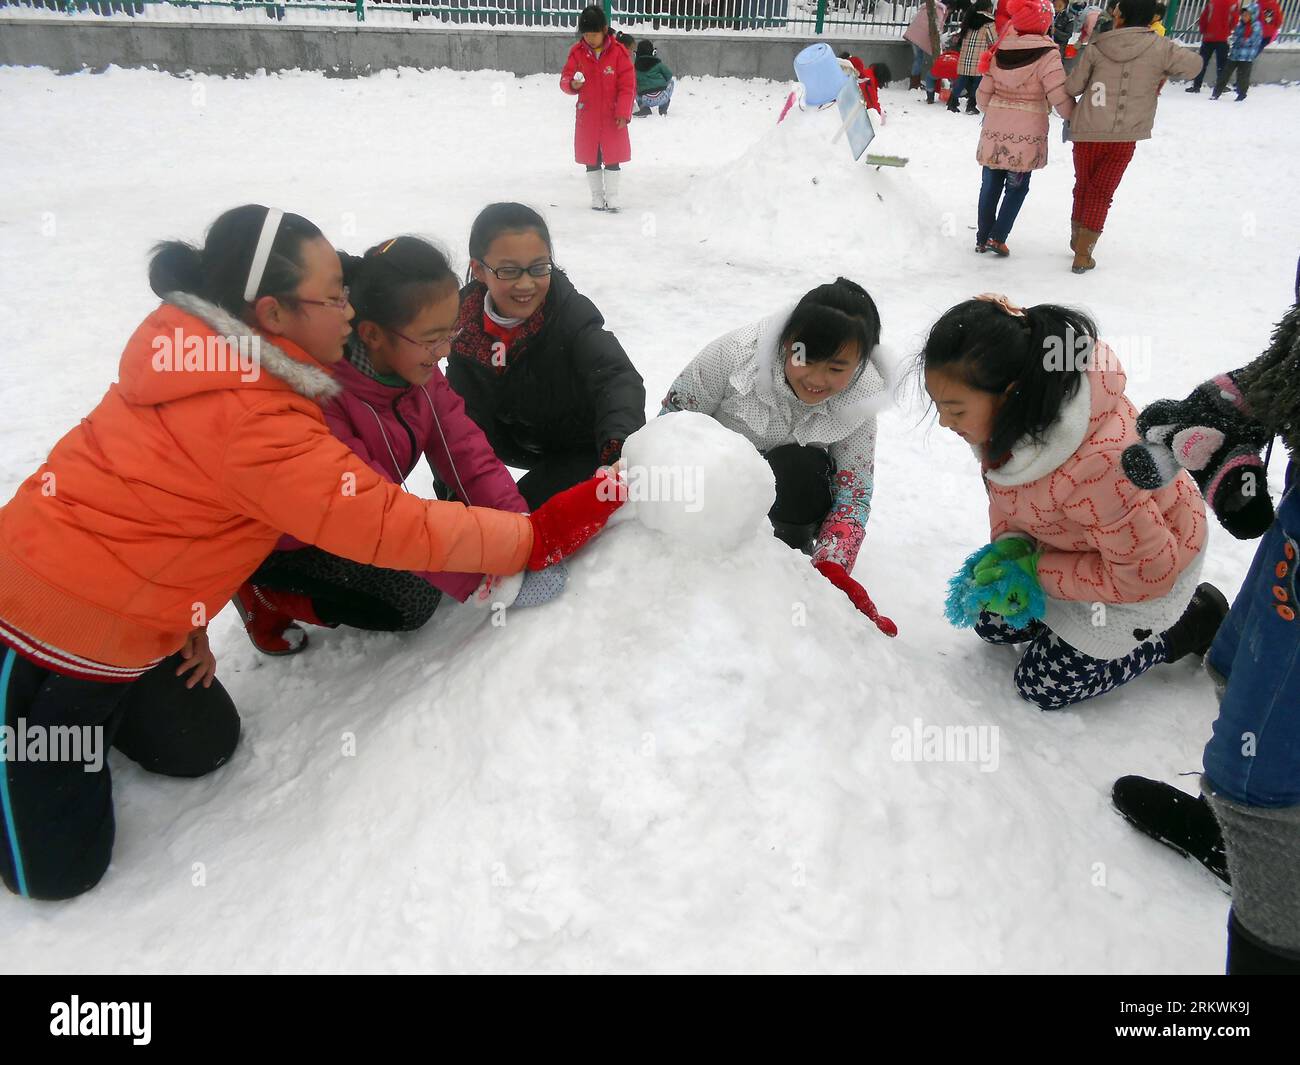 Bildnummer: 58701653  Datum: 14.11.2012  Copyright: imago/Xinhua (121114) -- JILIN, Nov. 14, 2012 (Xinhua) -- Pupils make a snowman on the playground of the Songjiang Experimental Primary School in Jilin City, northeast China s Jilin Province, Nov. 14, 2012. Primary and middle schools, as well as kindergartens in Jilin City, reopened on Wednesday as the weather turned better. (Xinhua/Zhu Wanchang)(mcg) CHINA-JILIN-SNOW-SCHOOLS-REOPENING (CN) PUBLICATIONxNOTxINxCHN Gesellschaft Bildung Kinder Schüler Schule Winter Schnee Jahreszeit x0x xmb 2012 quer      58701653 Date 14 11 2012 Copyright Imago Stock Photo